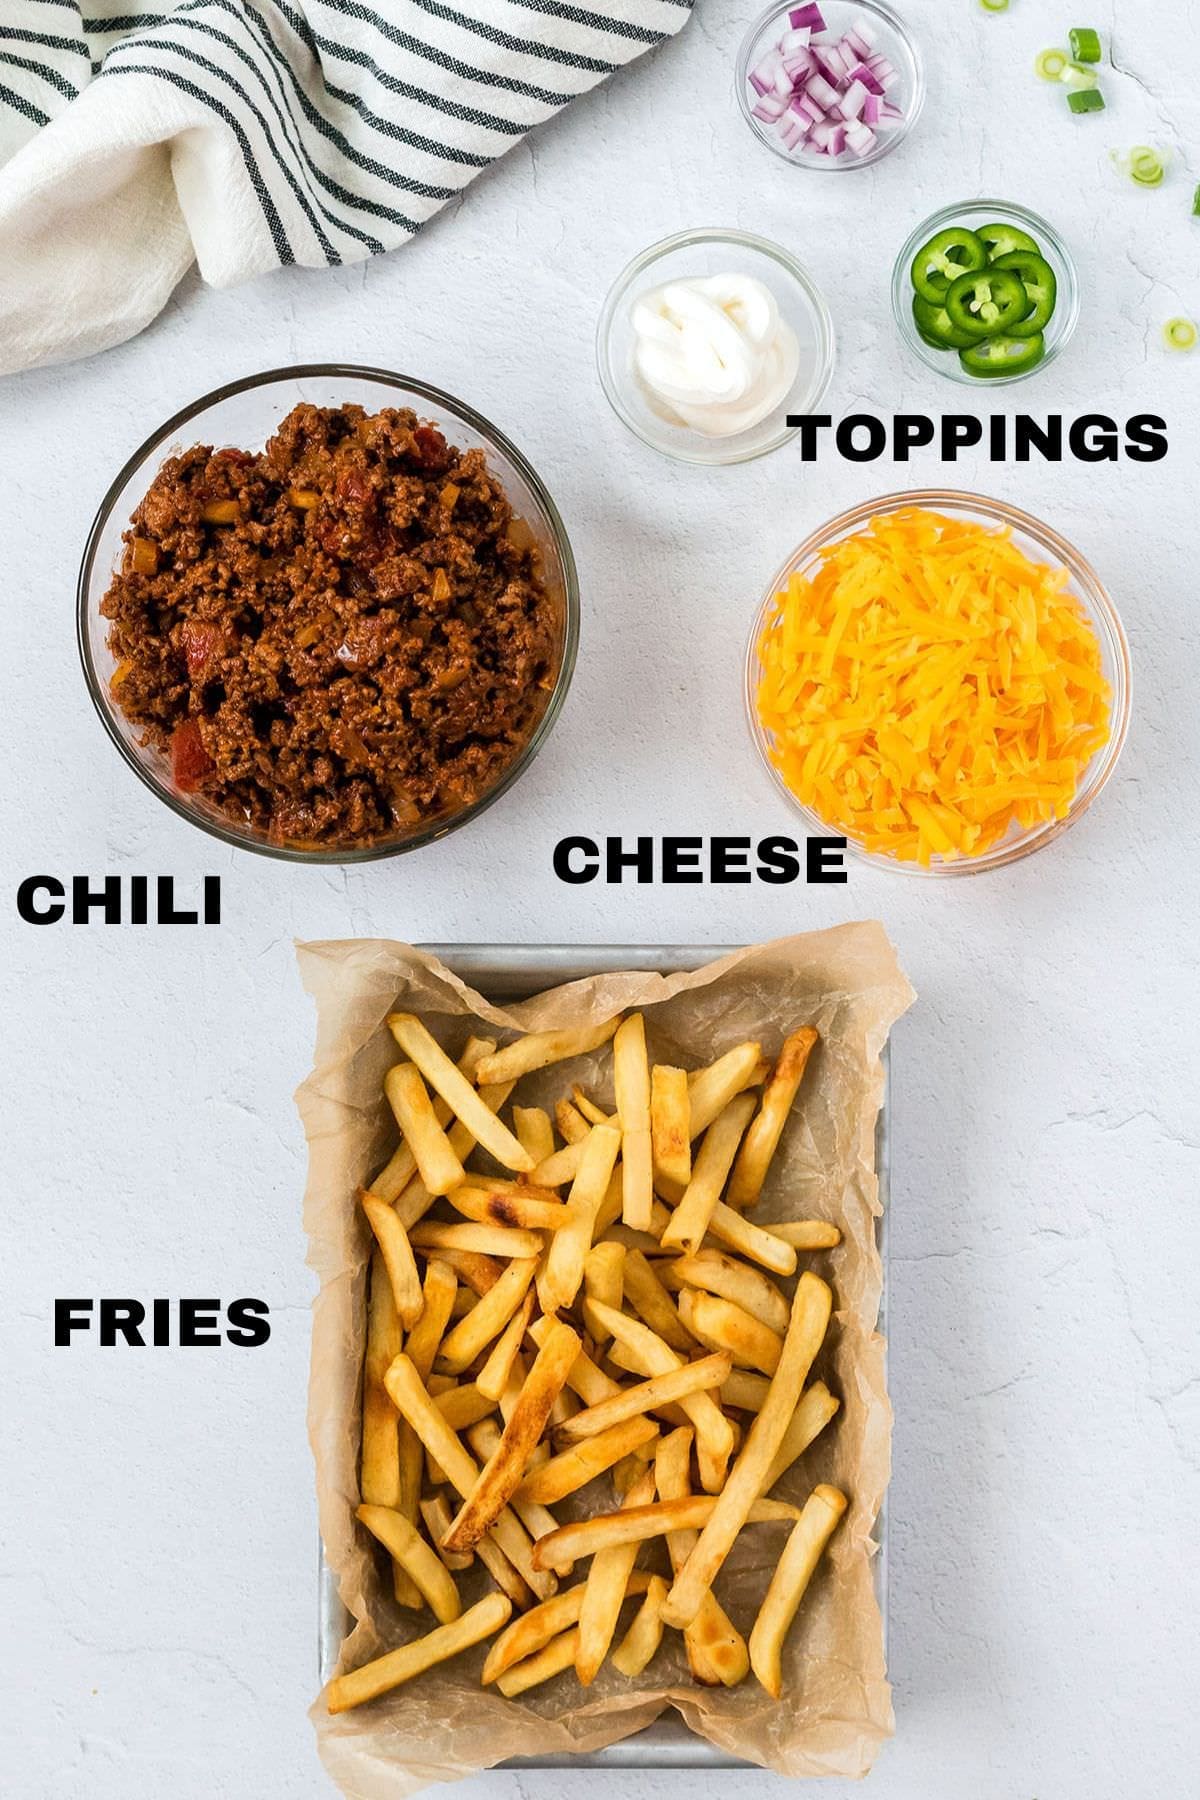 Sheet of frozen french fries along with a bowl of chili and cheese.